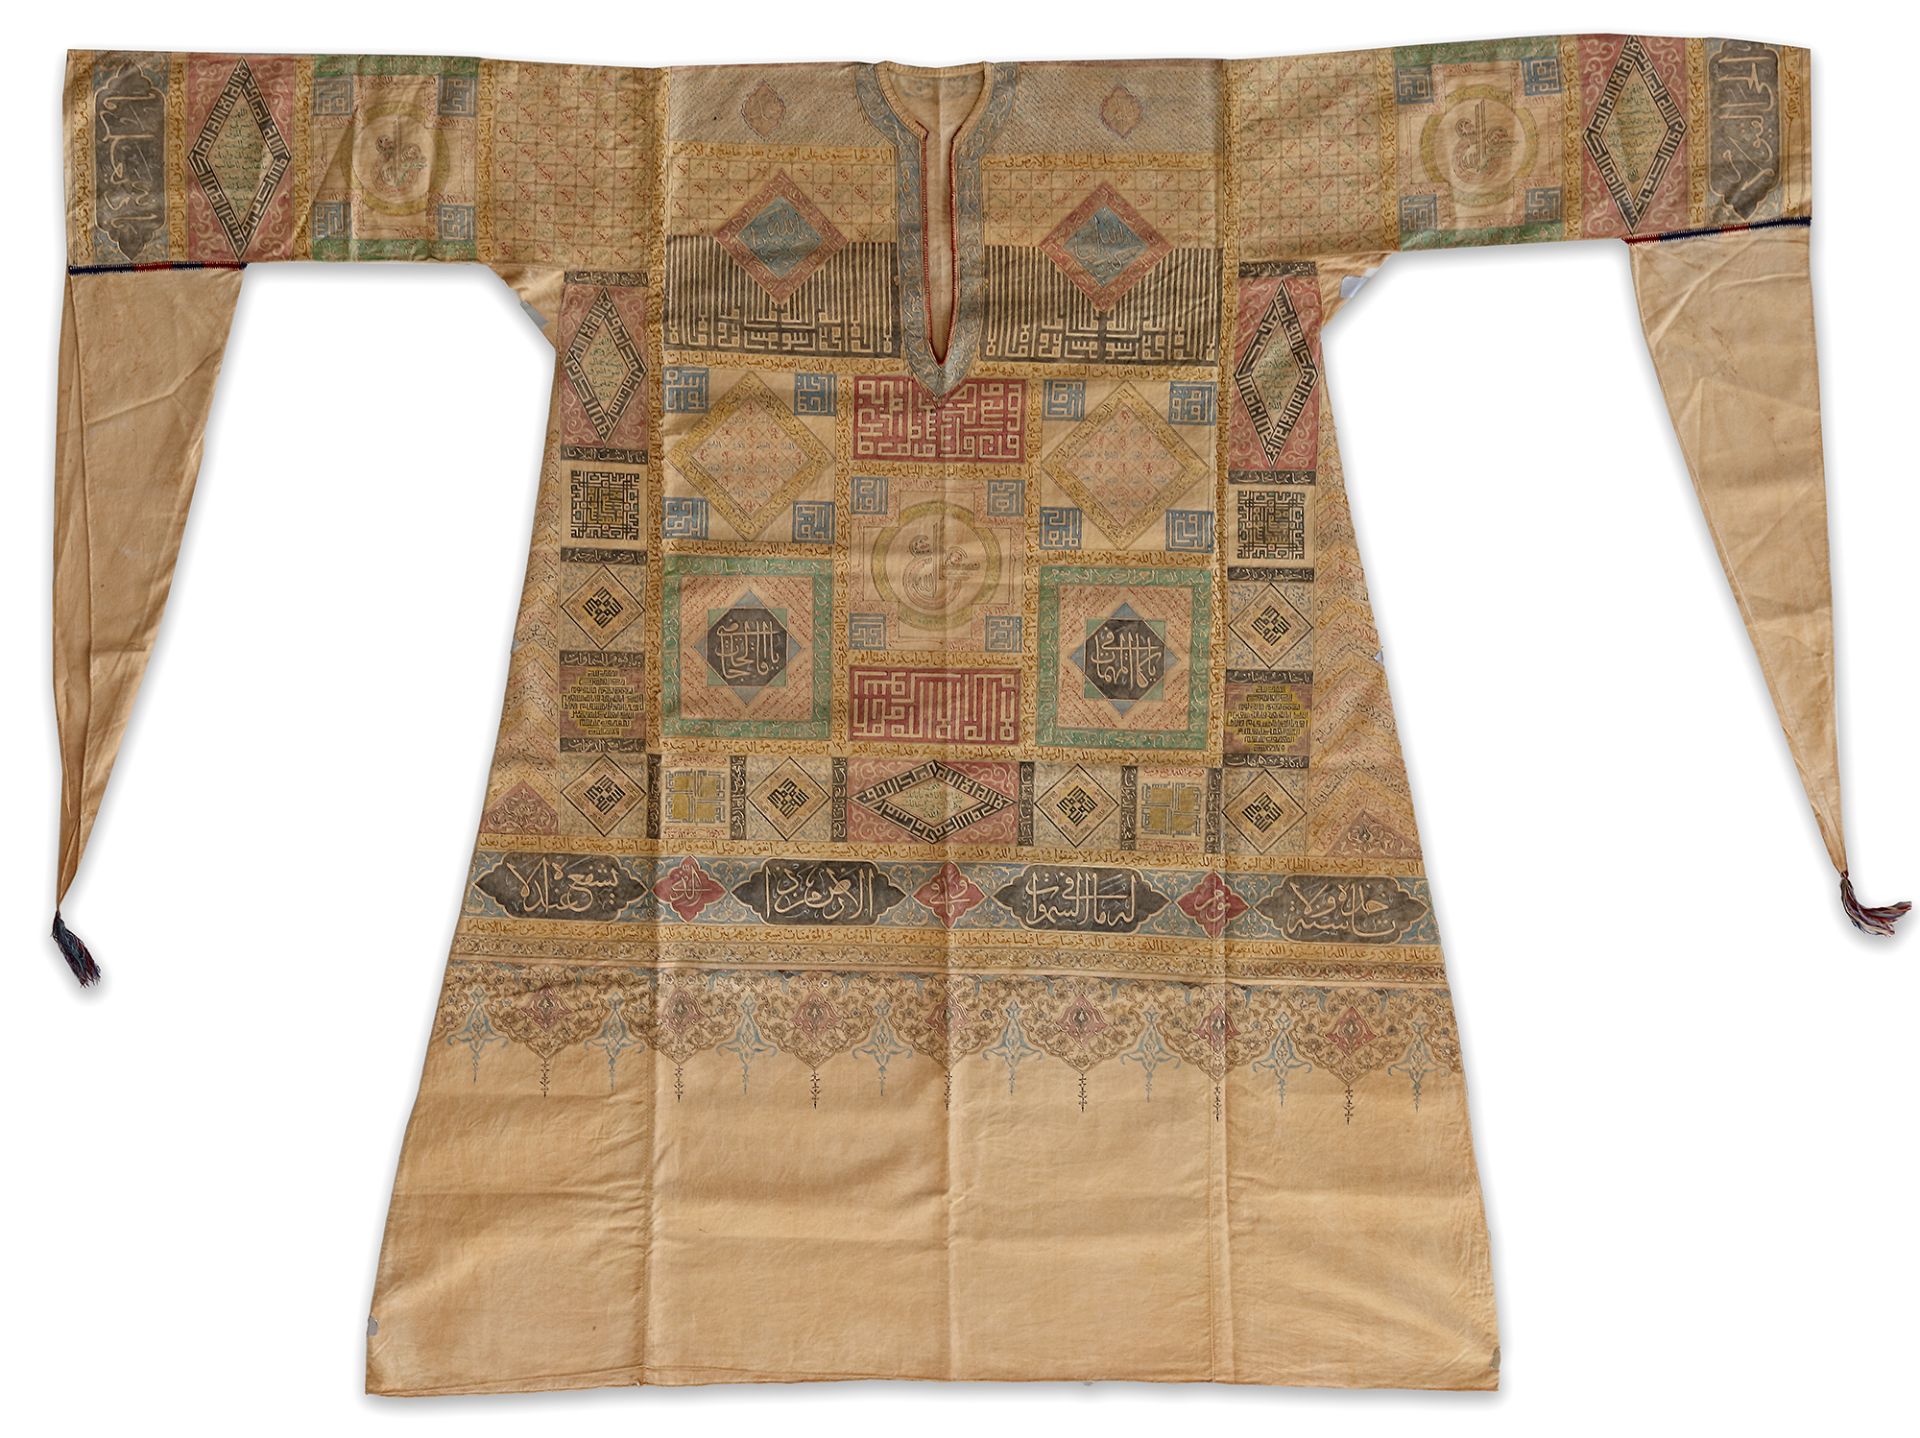 AN OTTOMAN TALISMANIC SHIRT (JAMA) WITH EXTRACTS FROM THE QURAN AND PRAYERS, TURKEY, 17TH-18TH CENTU